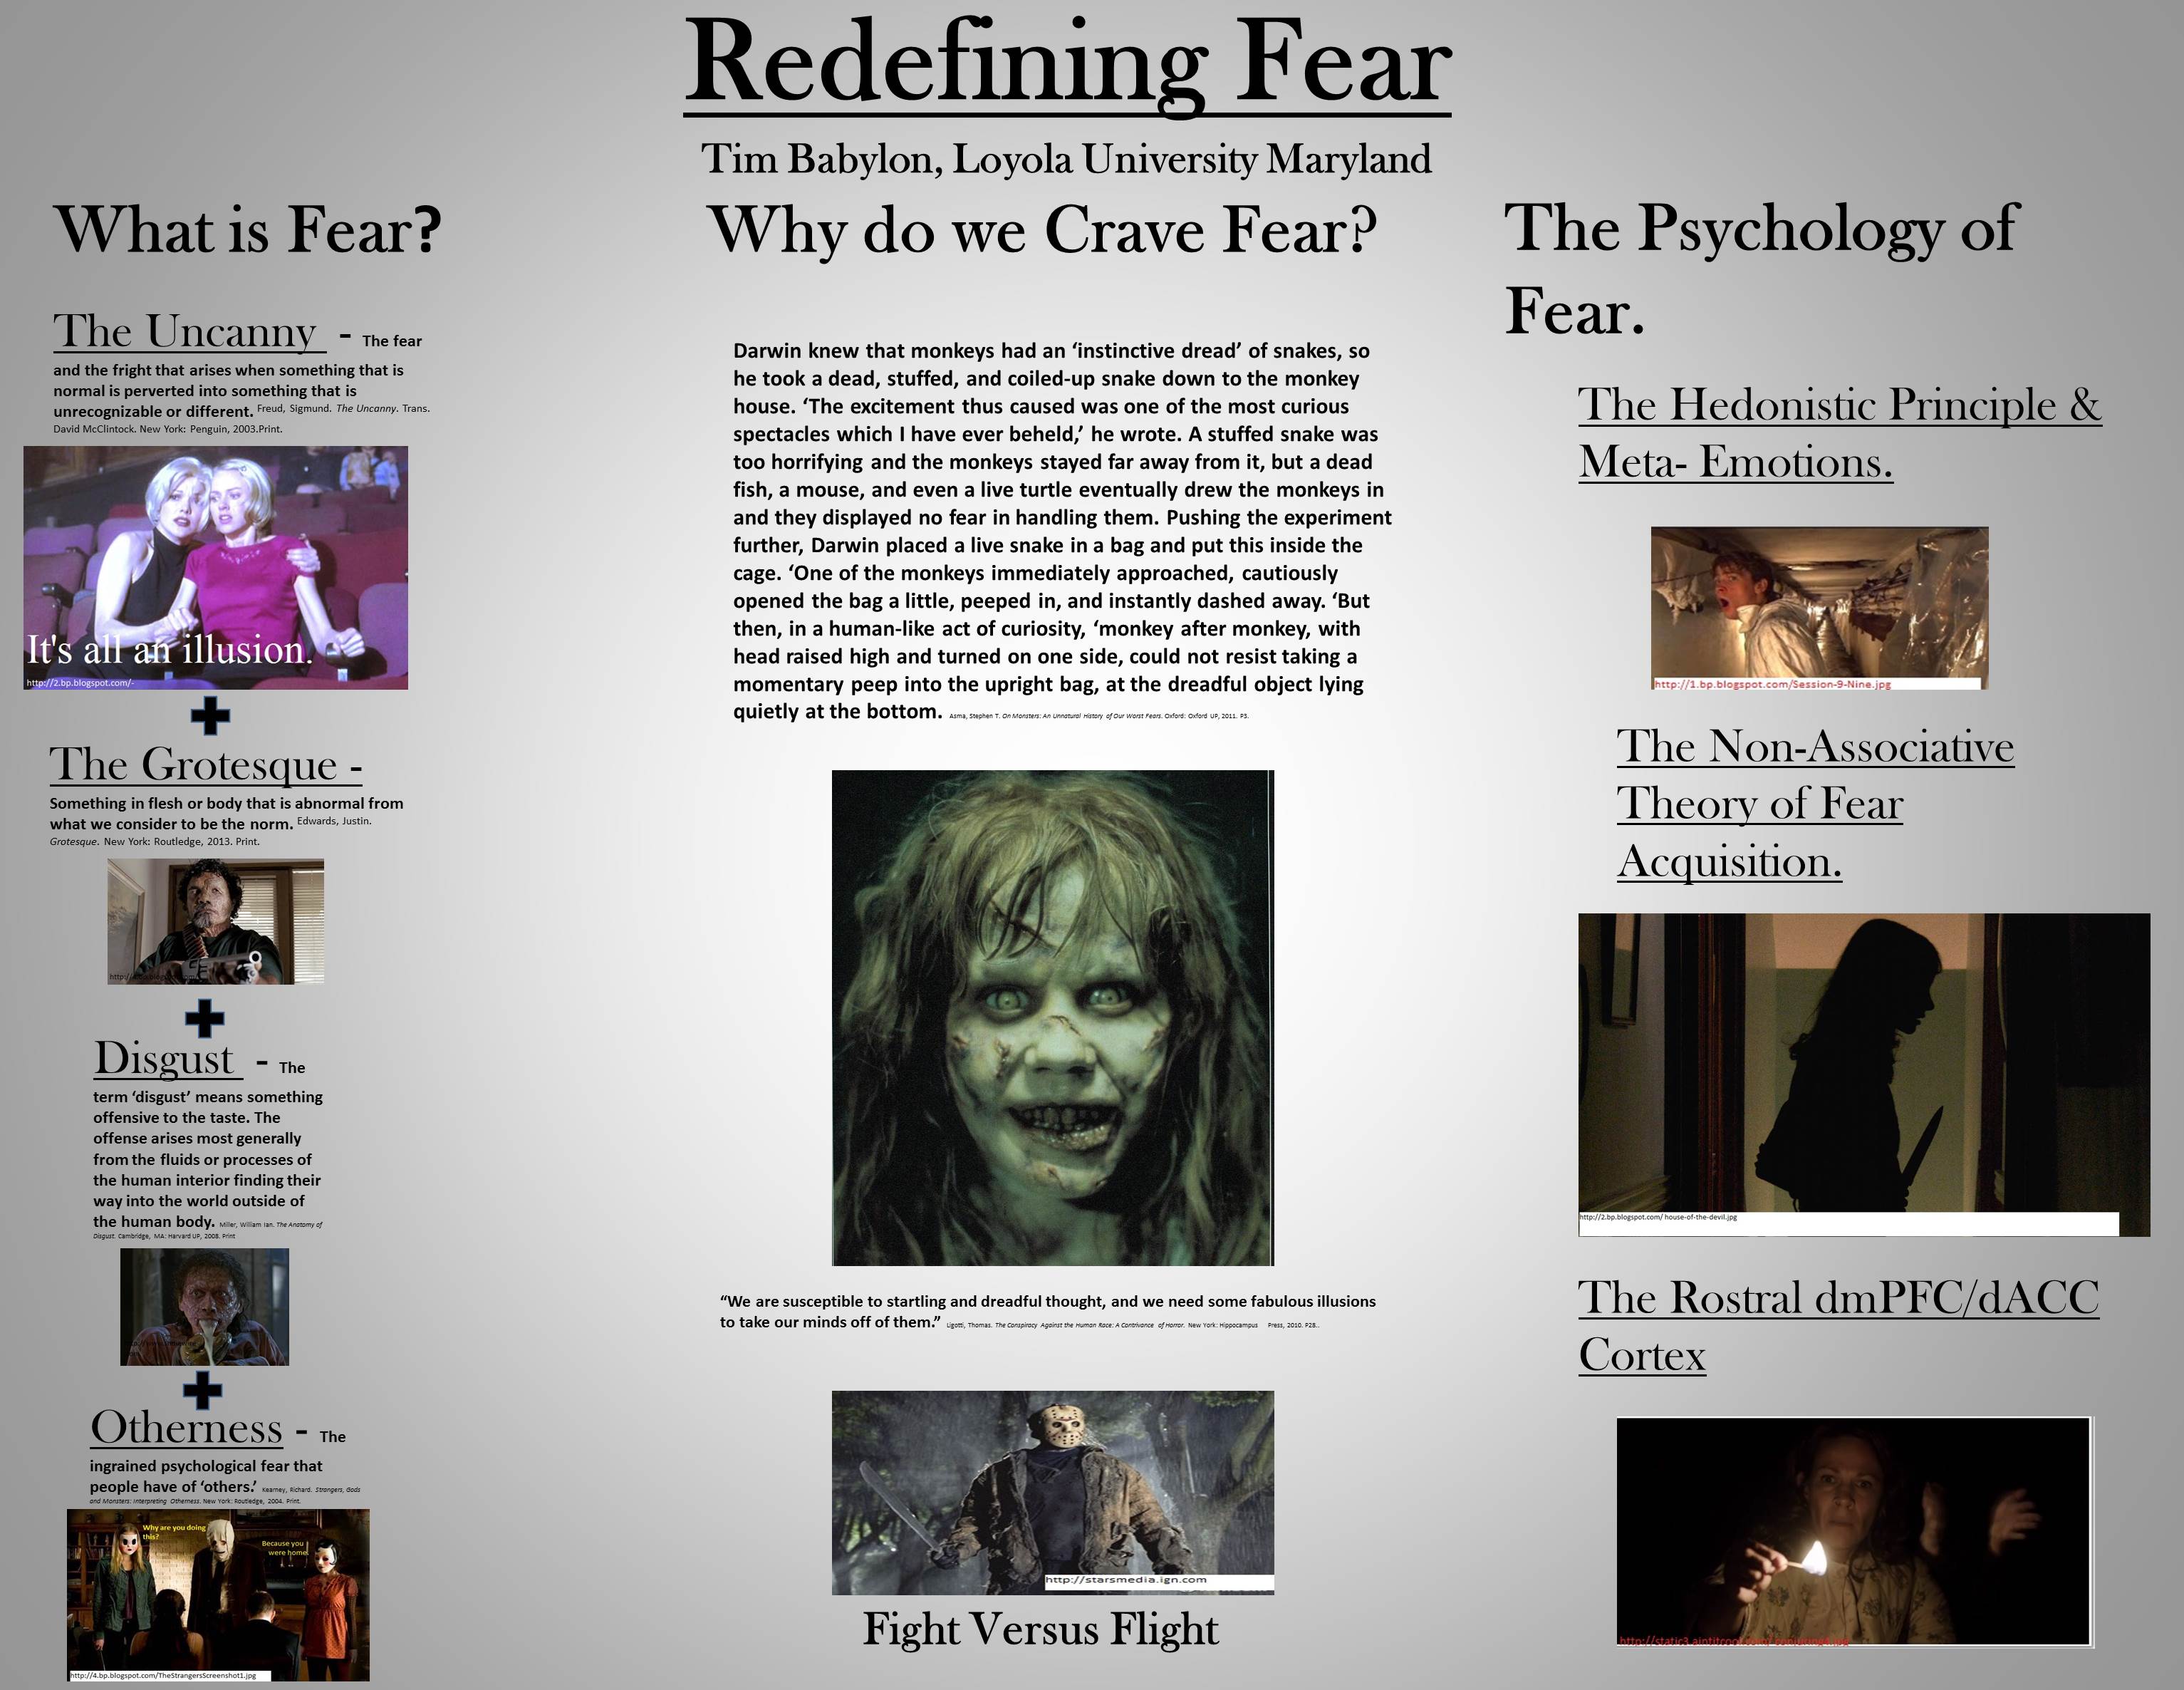 poster image: 'Redefining Fear'